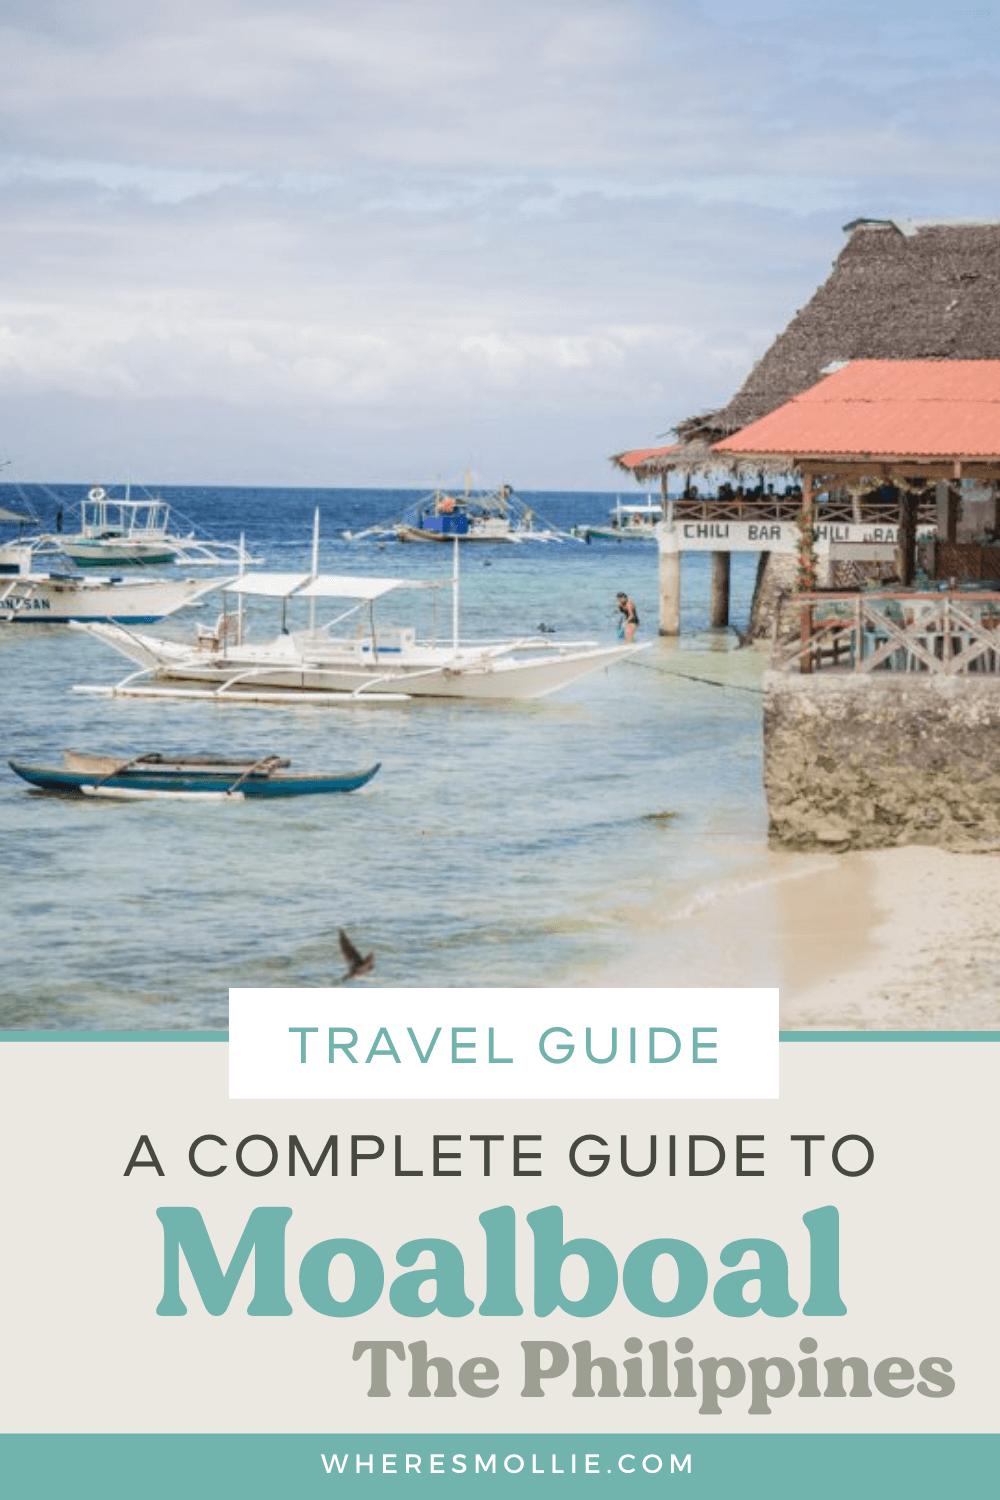 A travel guide for Moalboal in Cebu, The Philippines